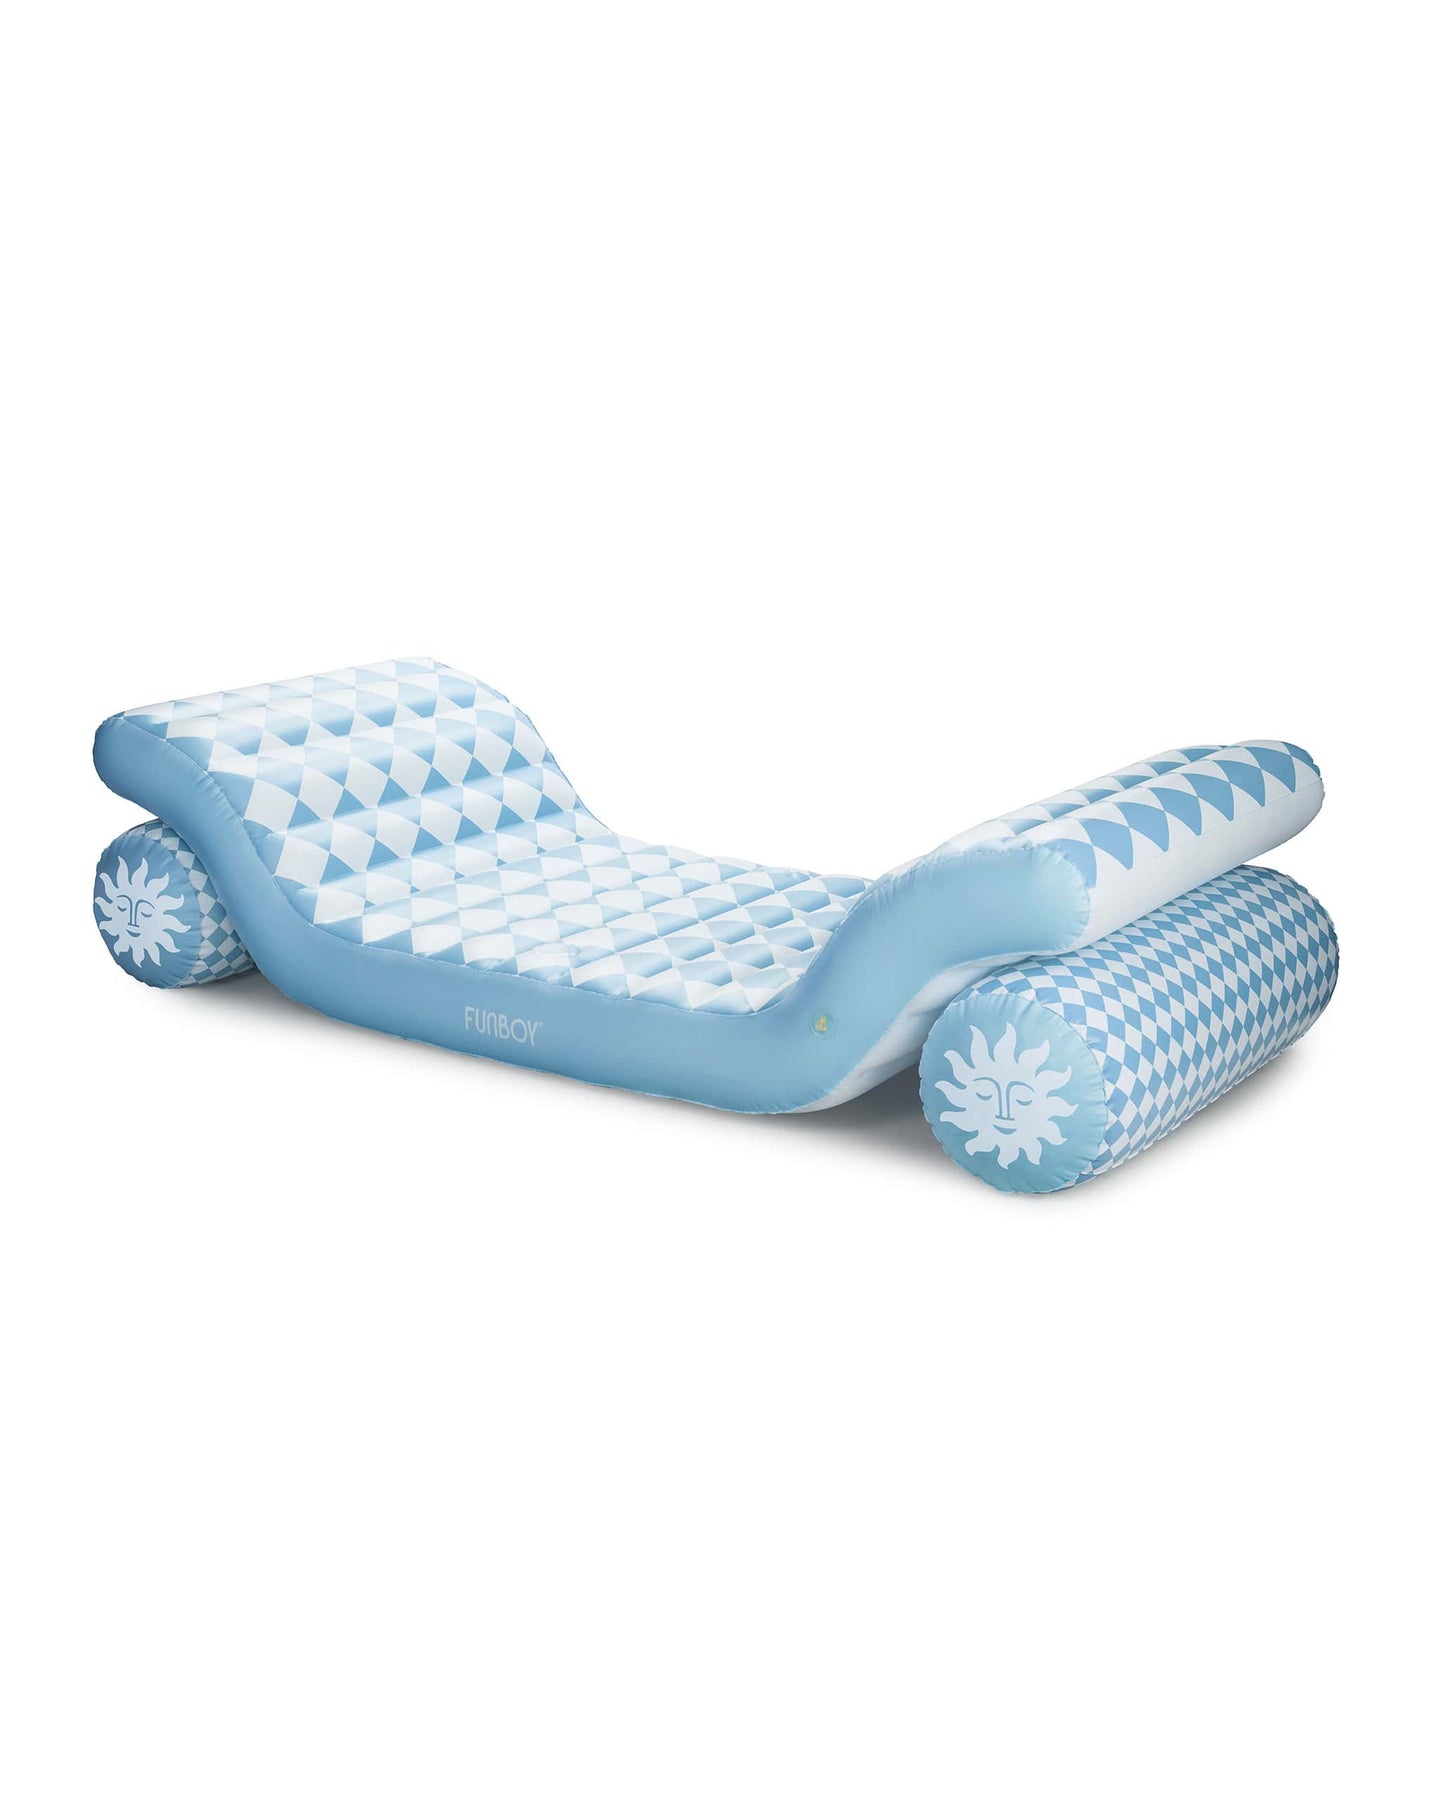 Best Pool Float - Two Way Chaise